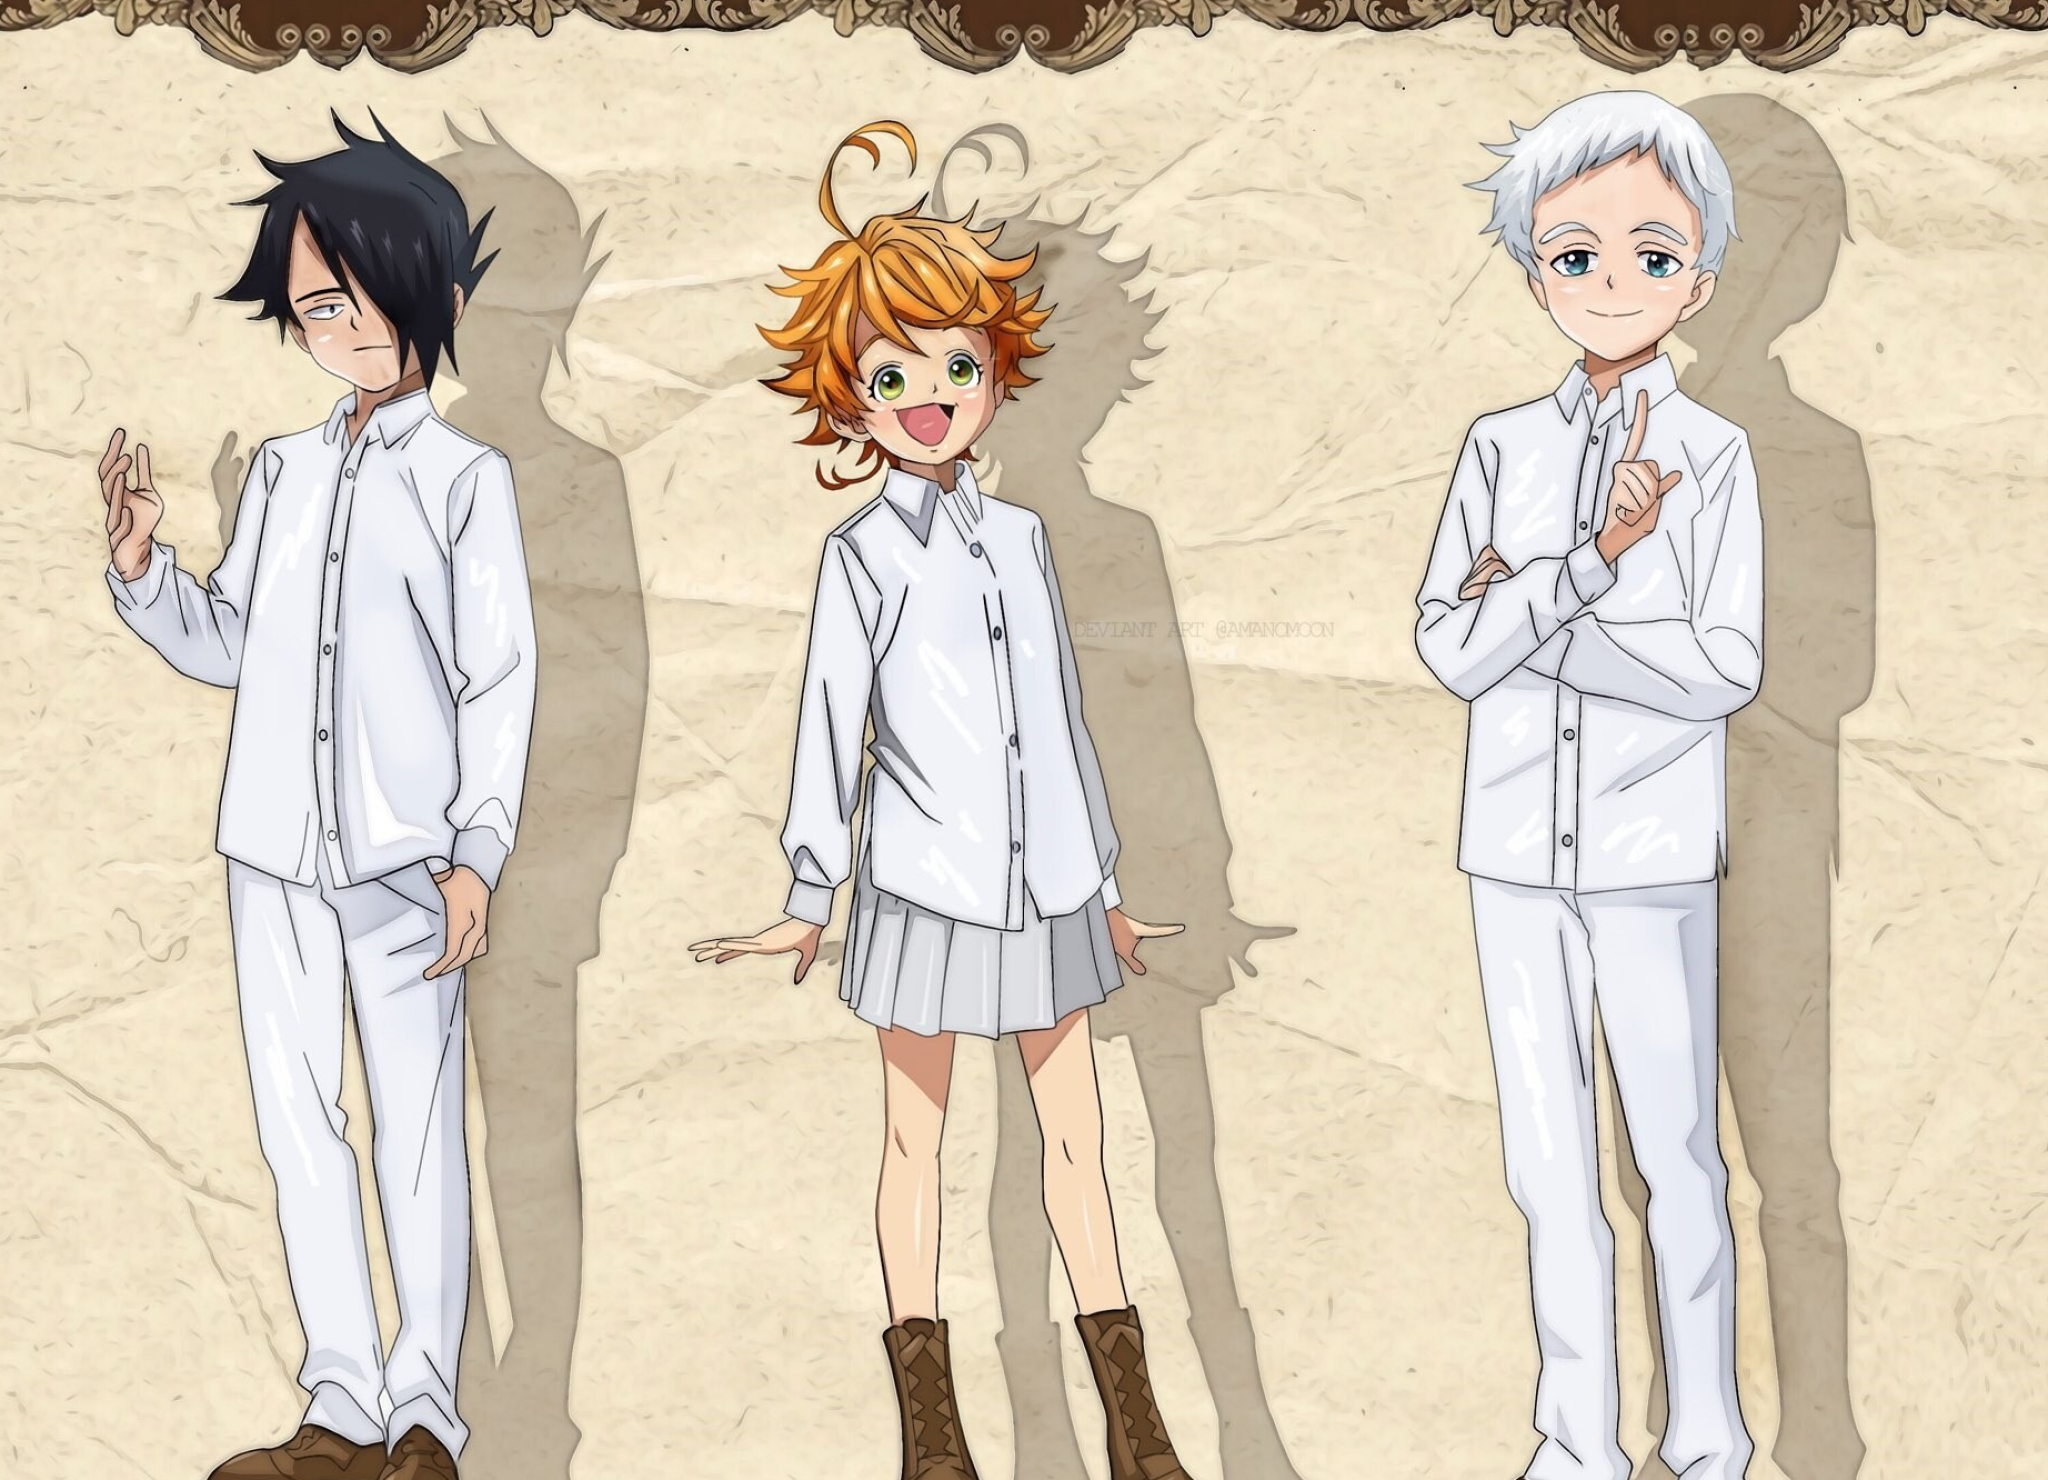 The Promised Neverland: Emma, Norman, Ray, UVERworld performed the series' opening theme song "Touch Off". 2050x1480 HD Wallpaper.